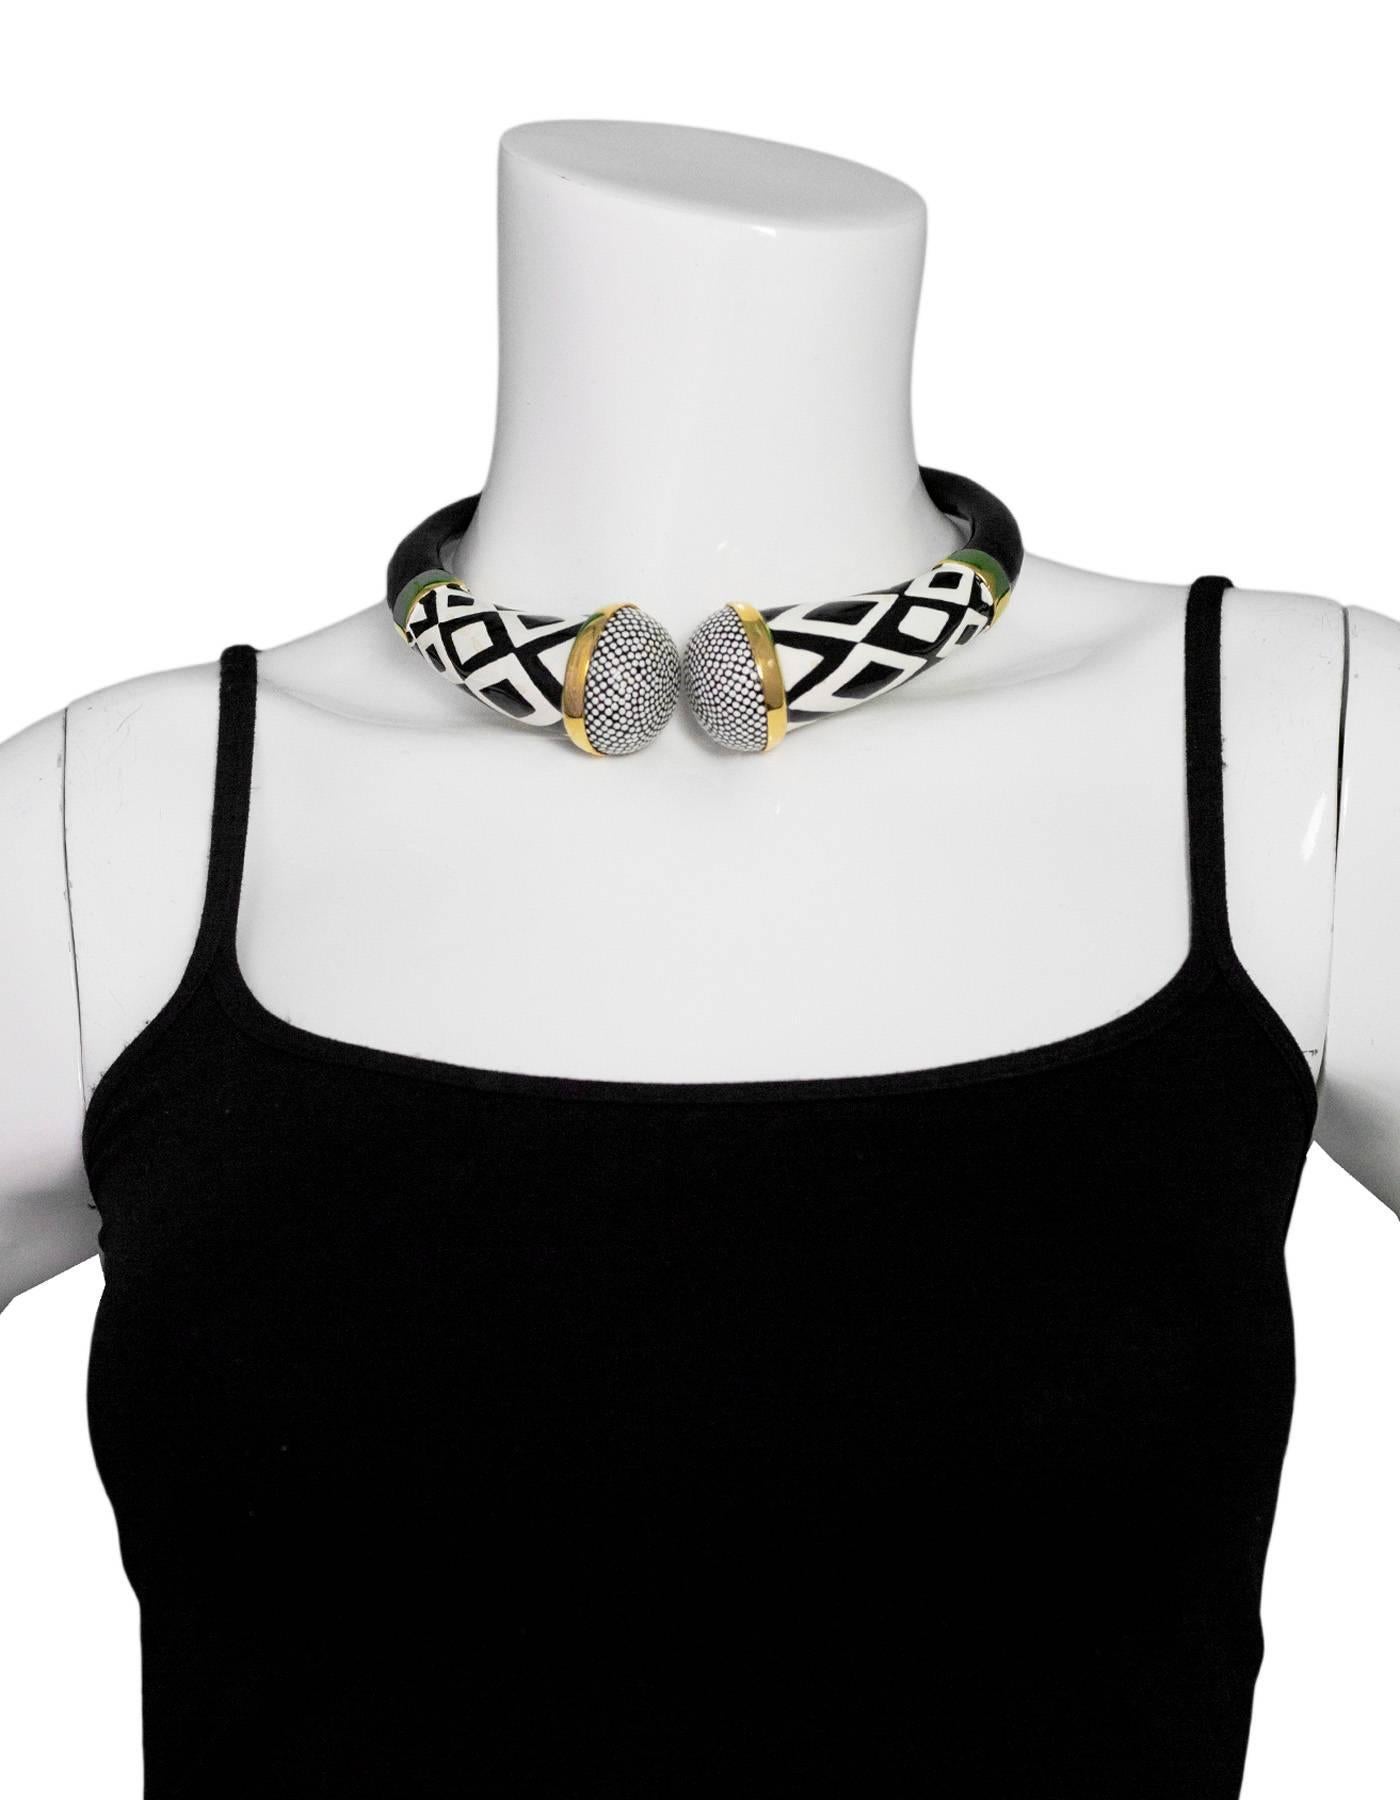 Tom Ford Black & White Tribal Choker Necklace

Made In: Italy
Color: Black, white gold
Materials: Enamel, metal
Closure: Hinge closure
Stamp: Tom Ford Made in Italy
Overall Condition: Excellent pre-owned condition, with the exception of light